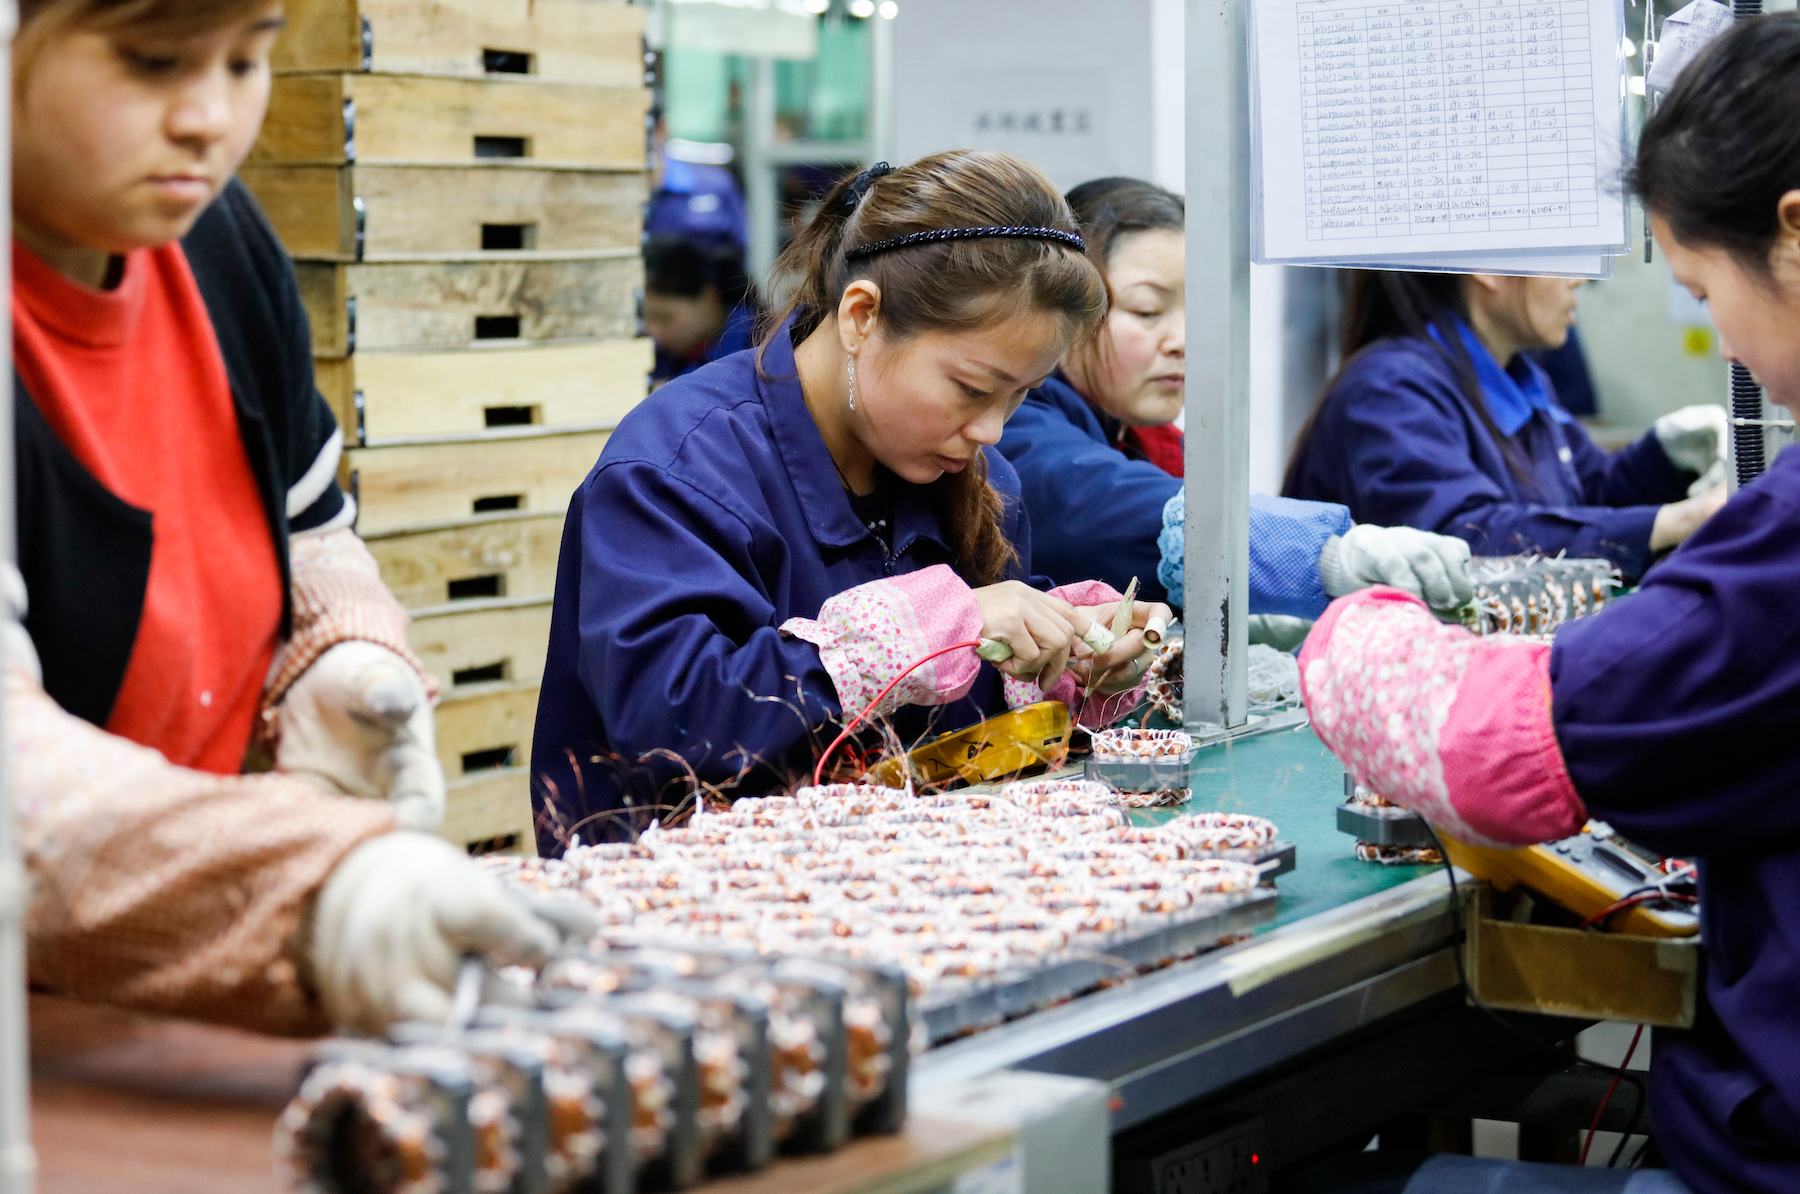 Workers assemble components in an electronics factory